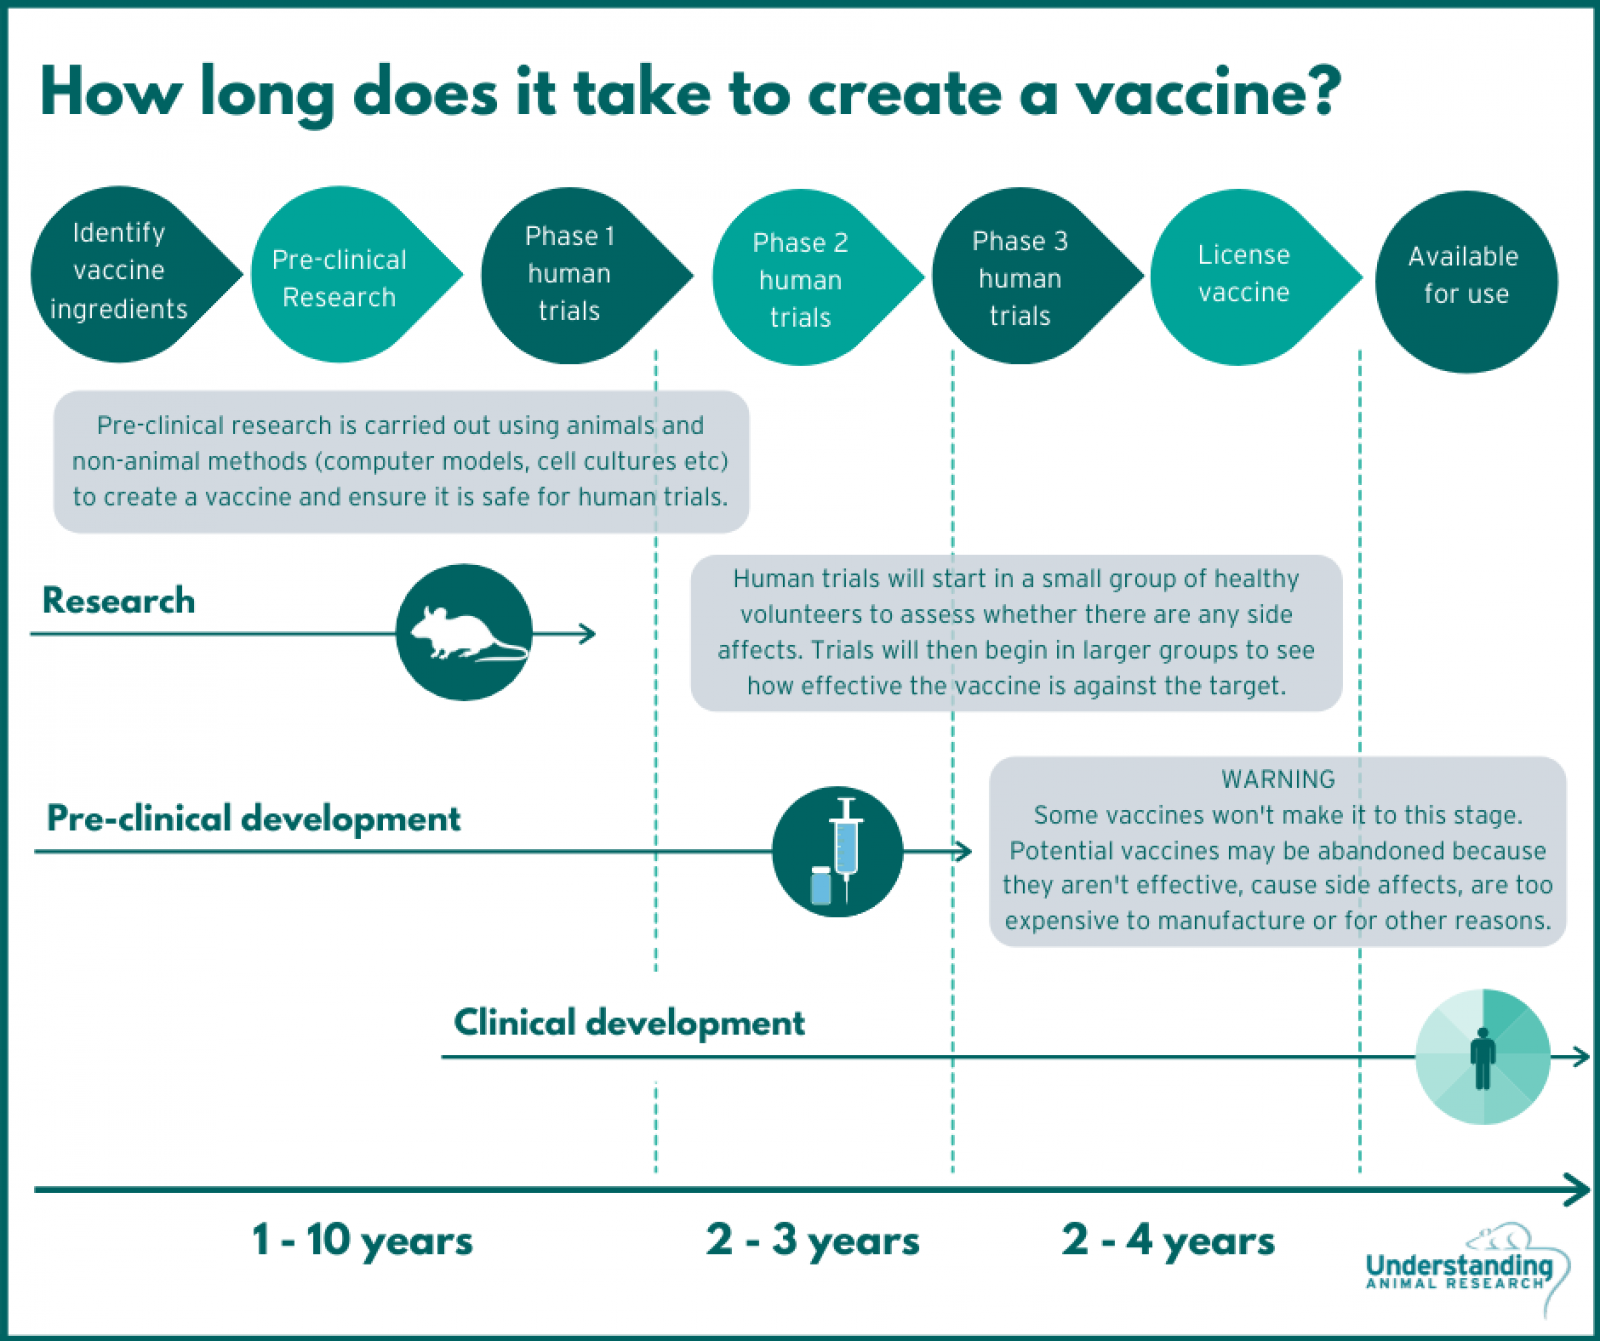 How long does it take to create a vaccine